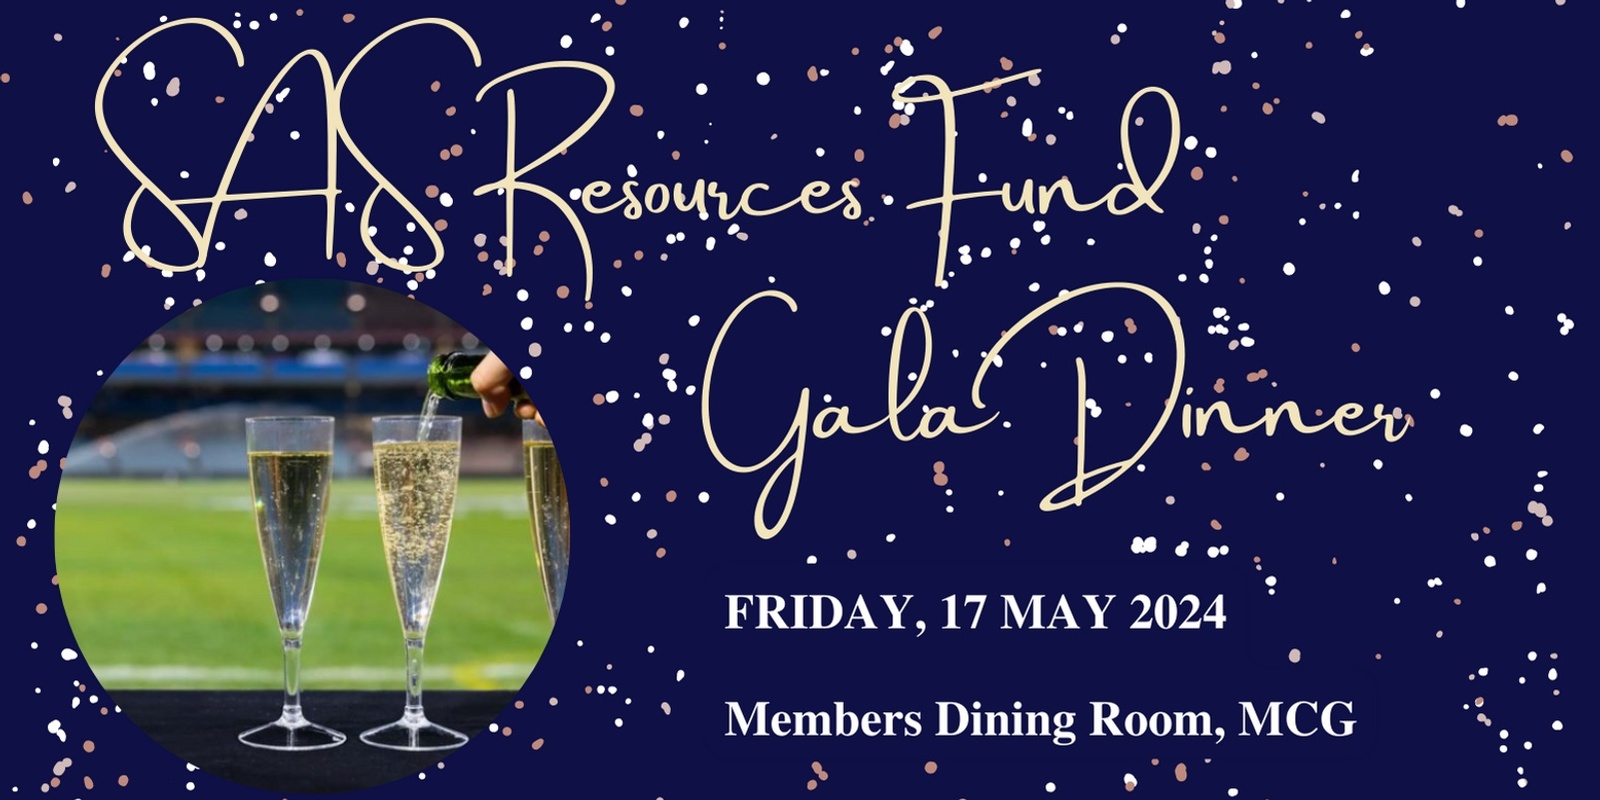 Banner image for 2024 Special Air Service Resources Fund Melbourne Gala Dinner